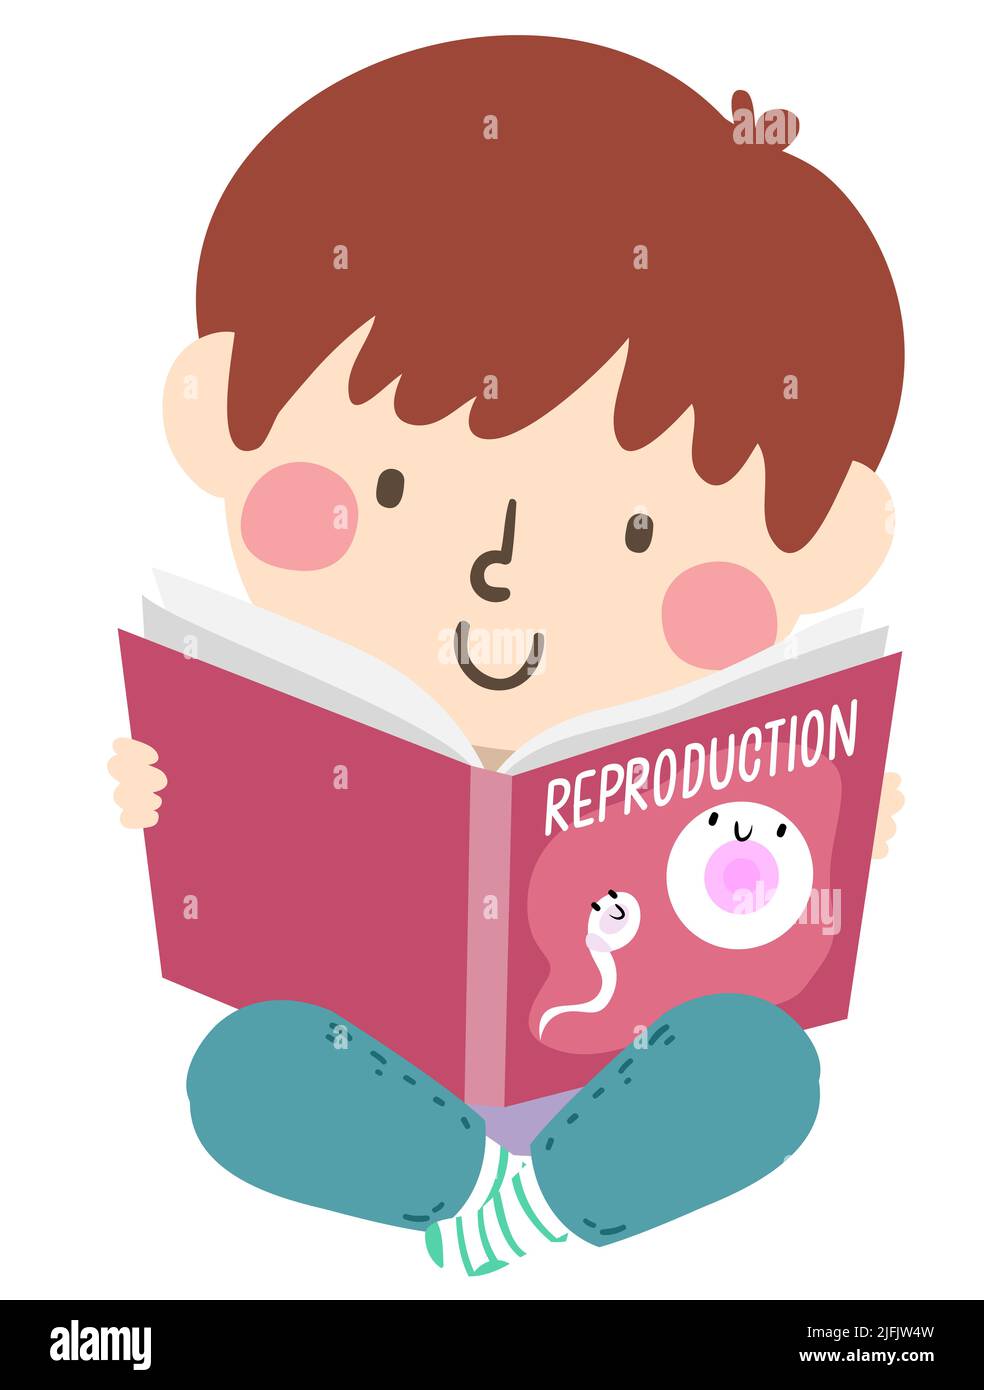 Illustration of Kid Boy Student Sitting while Reading a Book with Sperm and Egg Cell on Cover, Learning About Reproduction Stock Photo